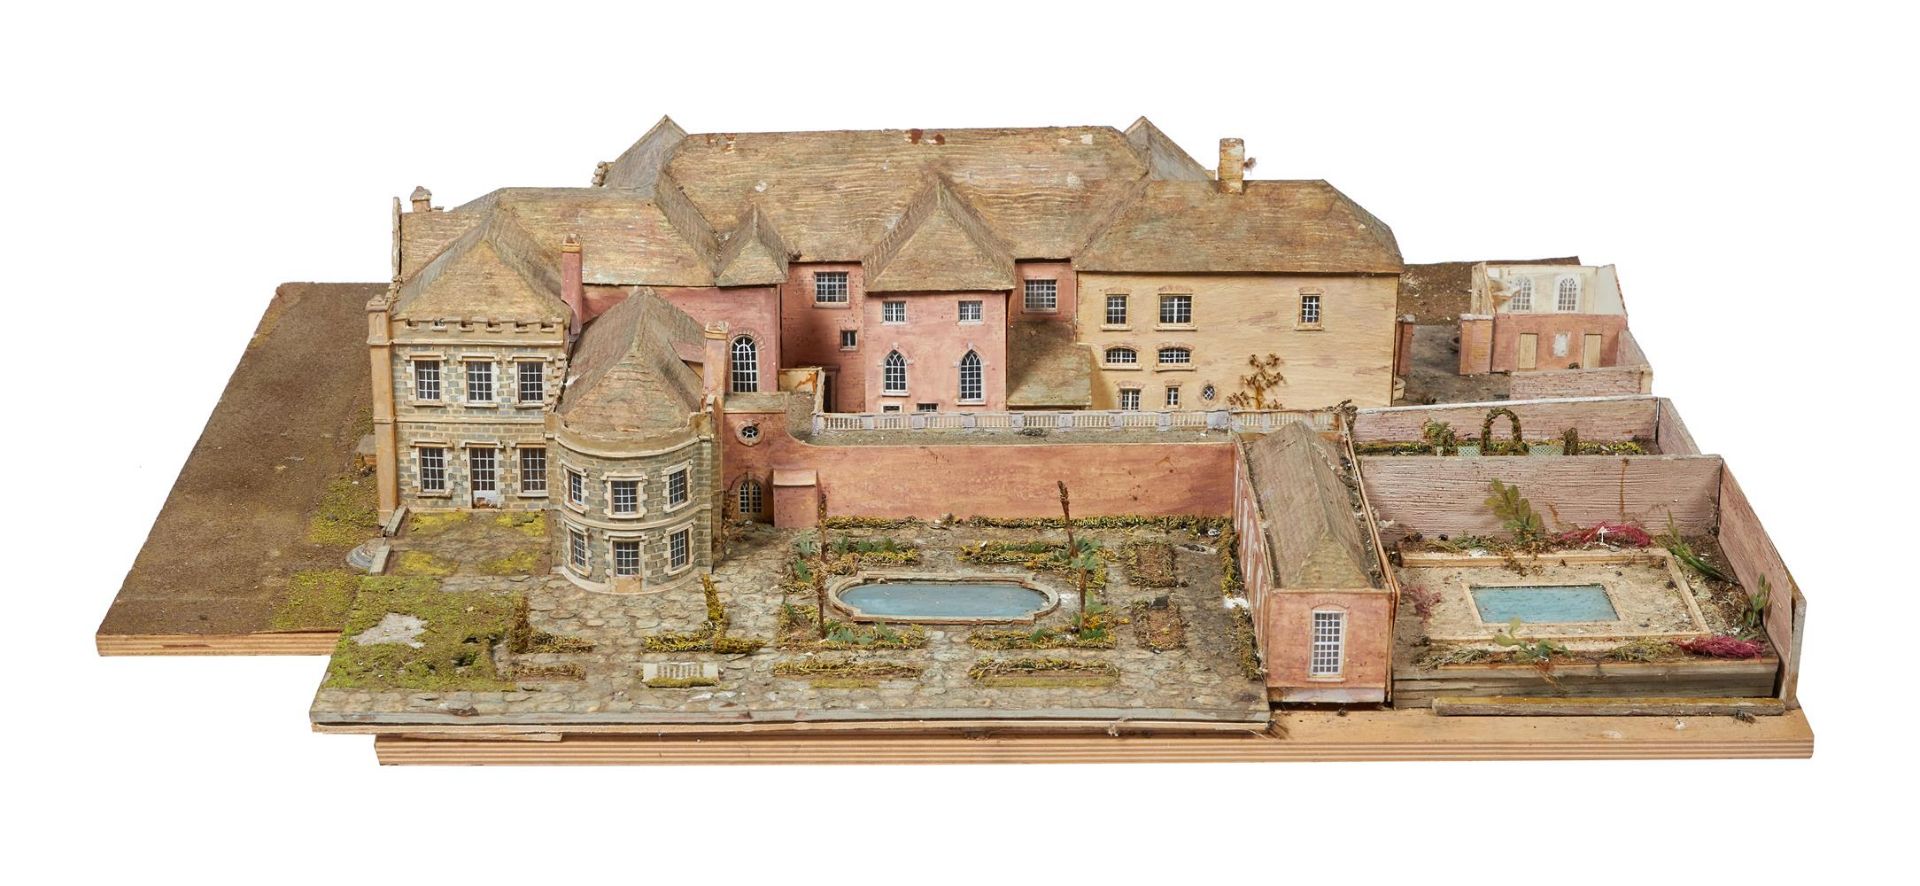 AN ARCHITECTURAL MODEL OF FLAXLEY ABBEY, BY OLIVER MESSEL - Image 3 of 34